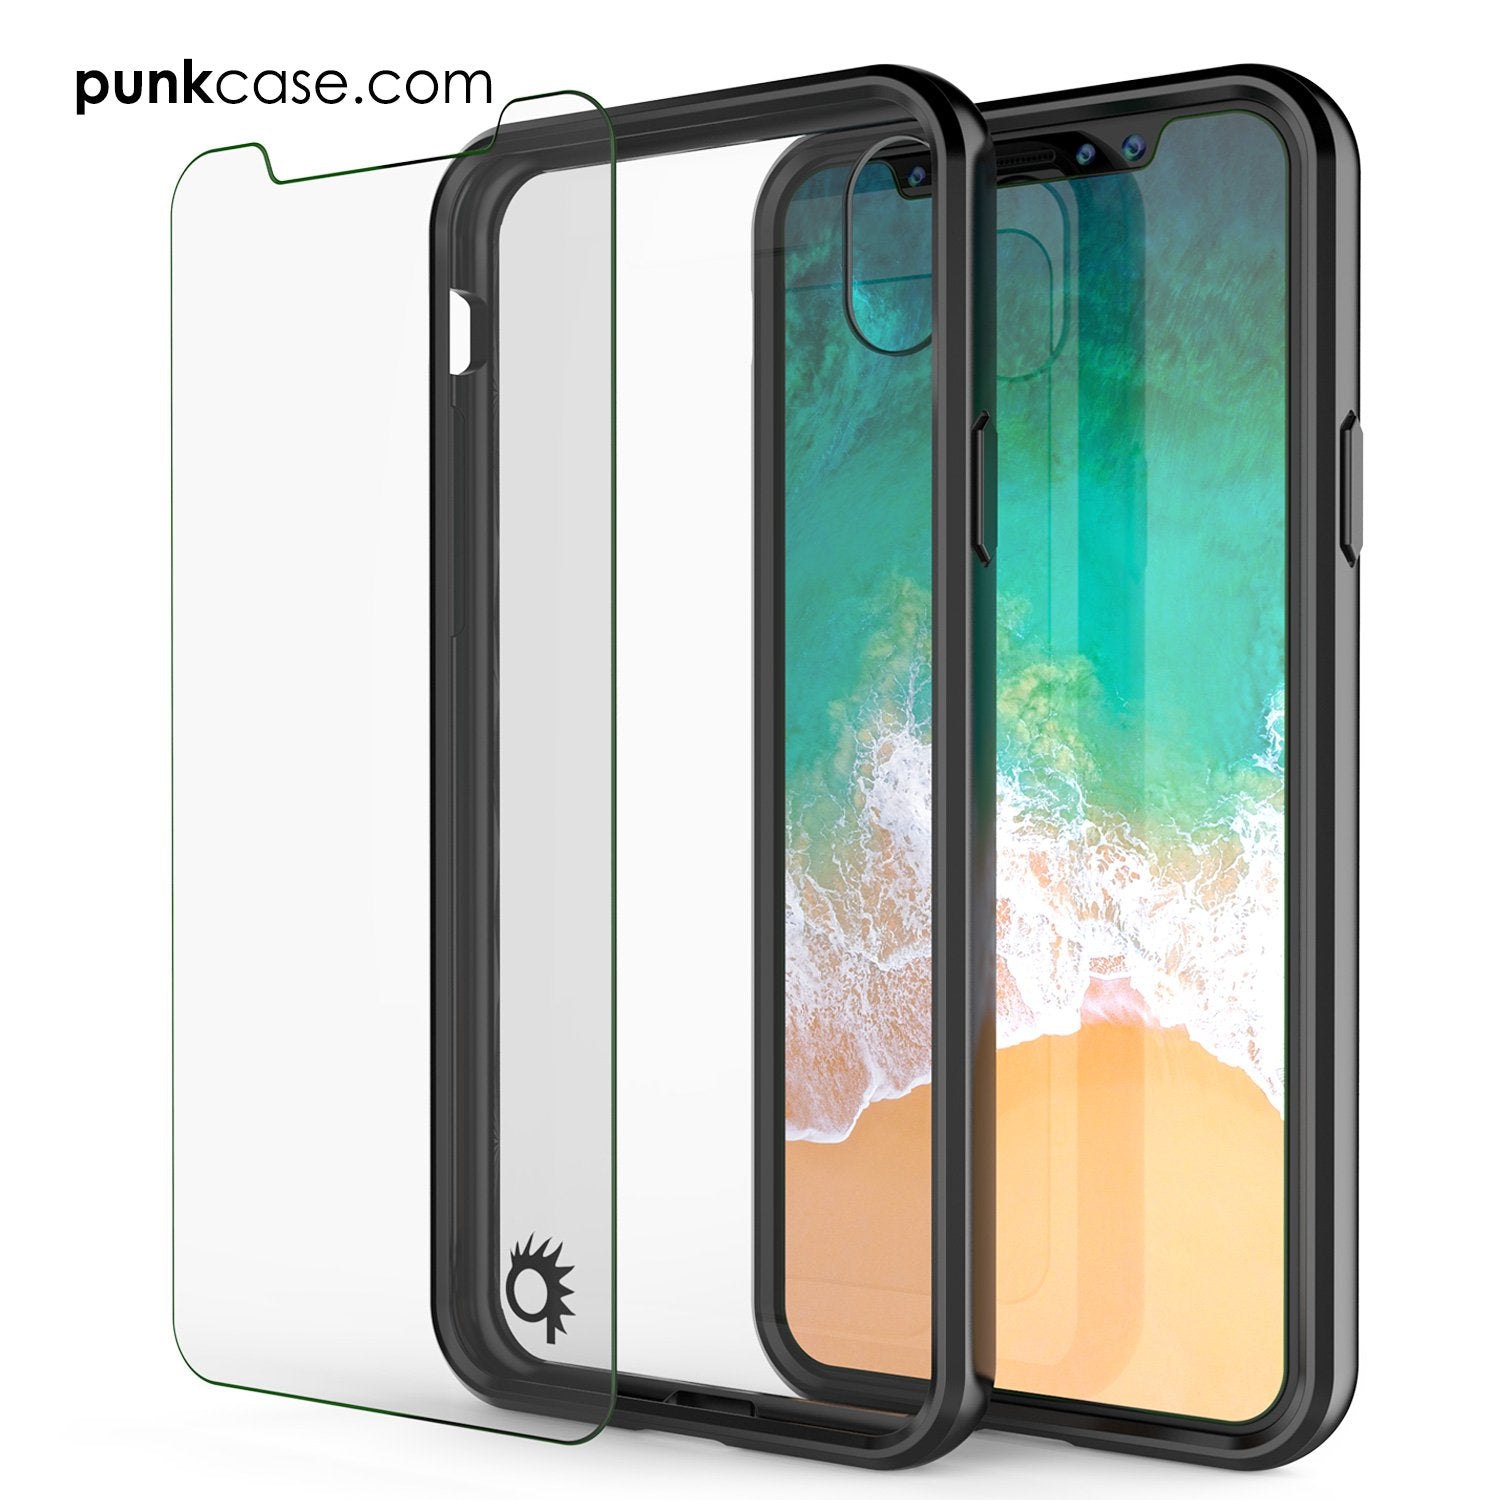 iPhone X Case, PUNKcase [LUCID 2.0 Series] [Slim Fit] Armor Cover W/Integrated Anti-Shock System [Black] - PunkCase NZ